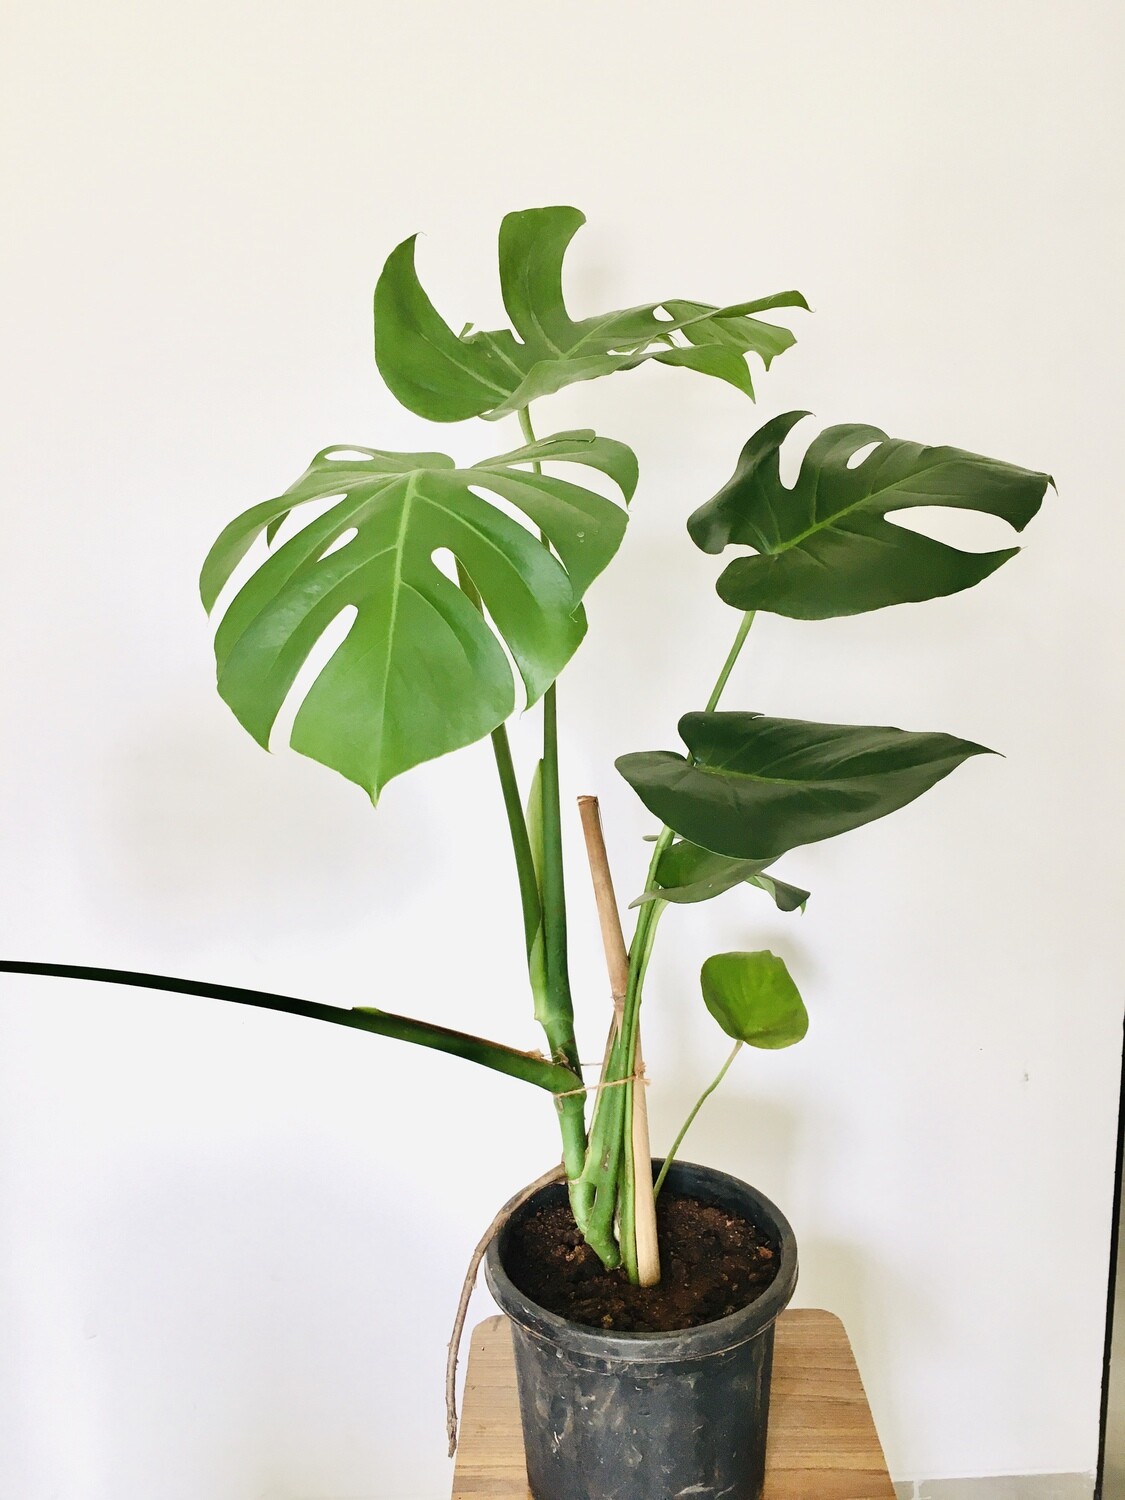 Monstera Plant with Stick in 10 inches Nursery Pot (2 -3 Ft)